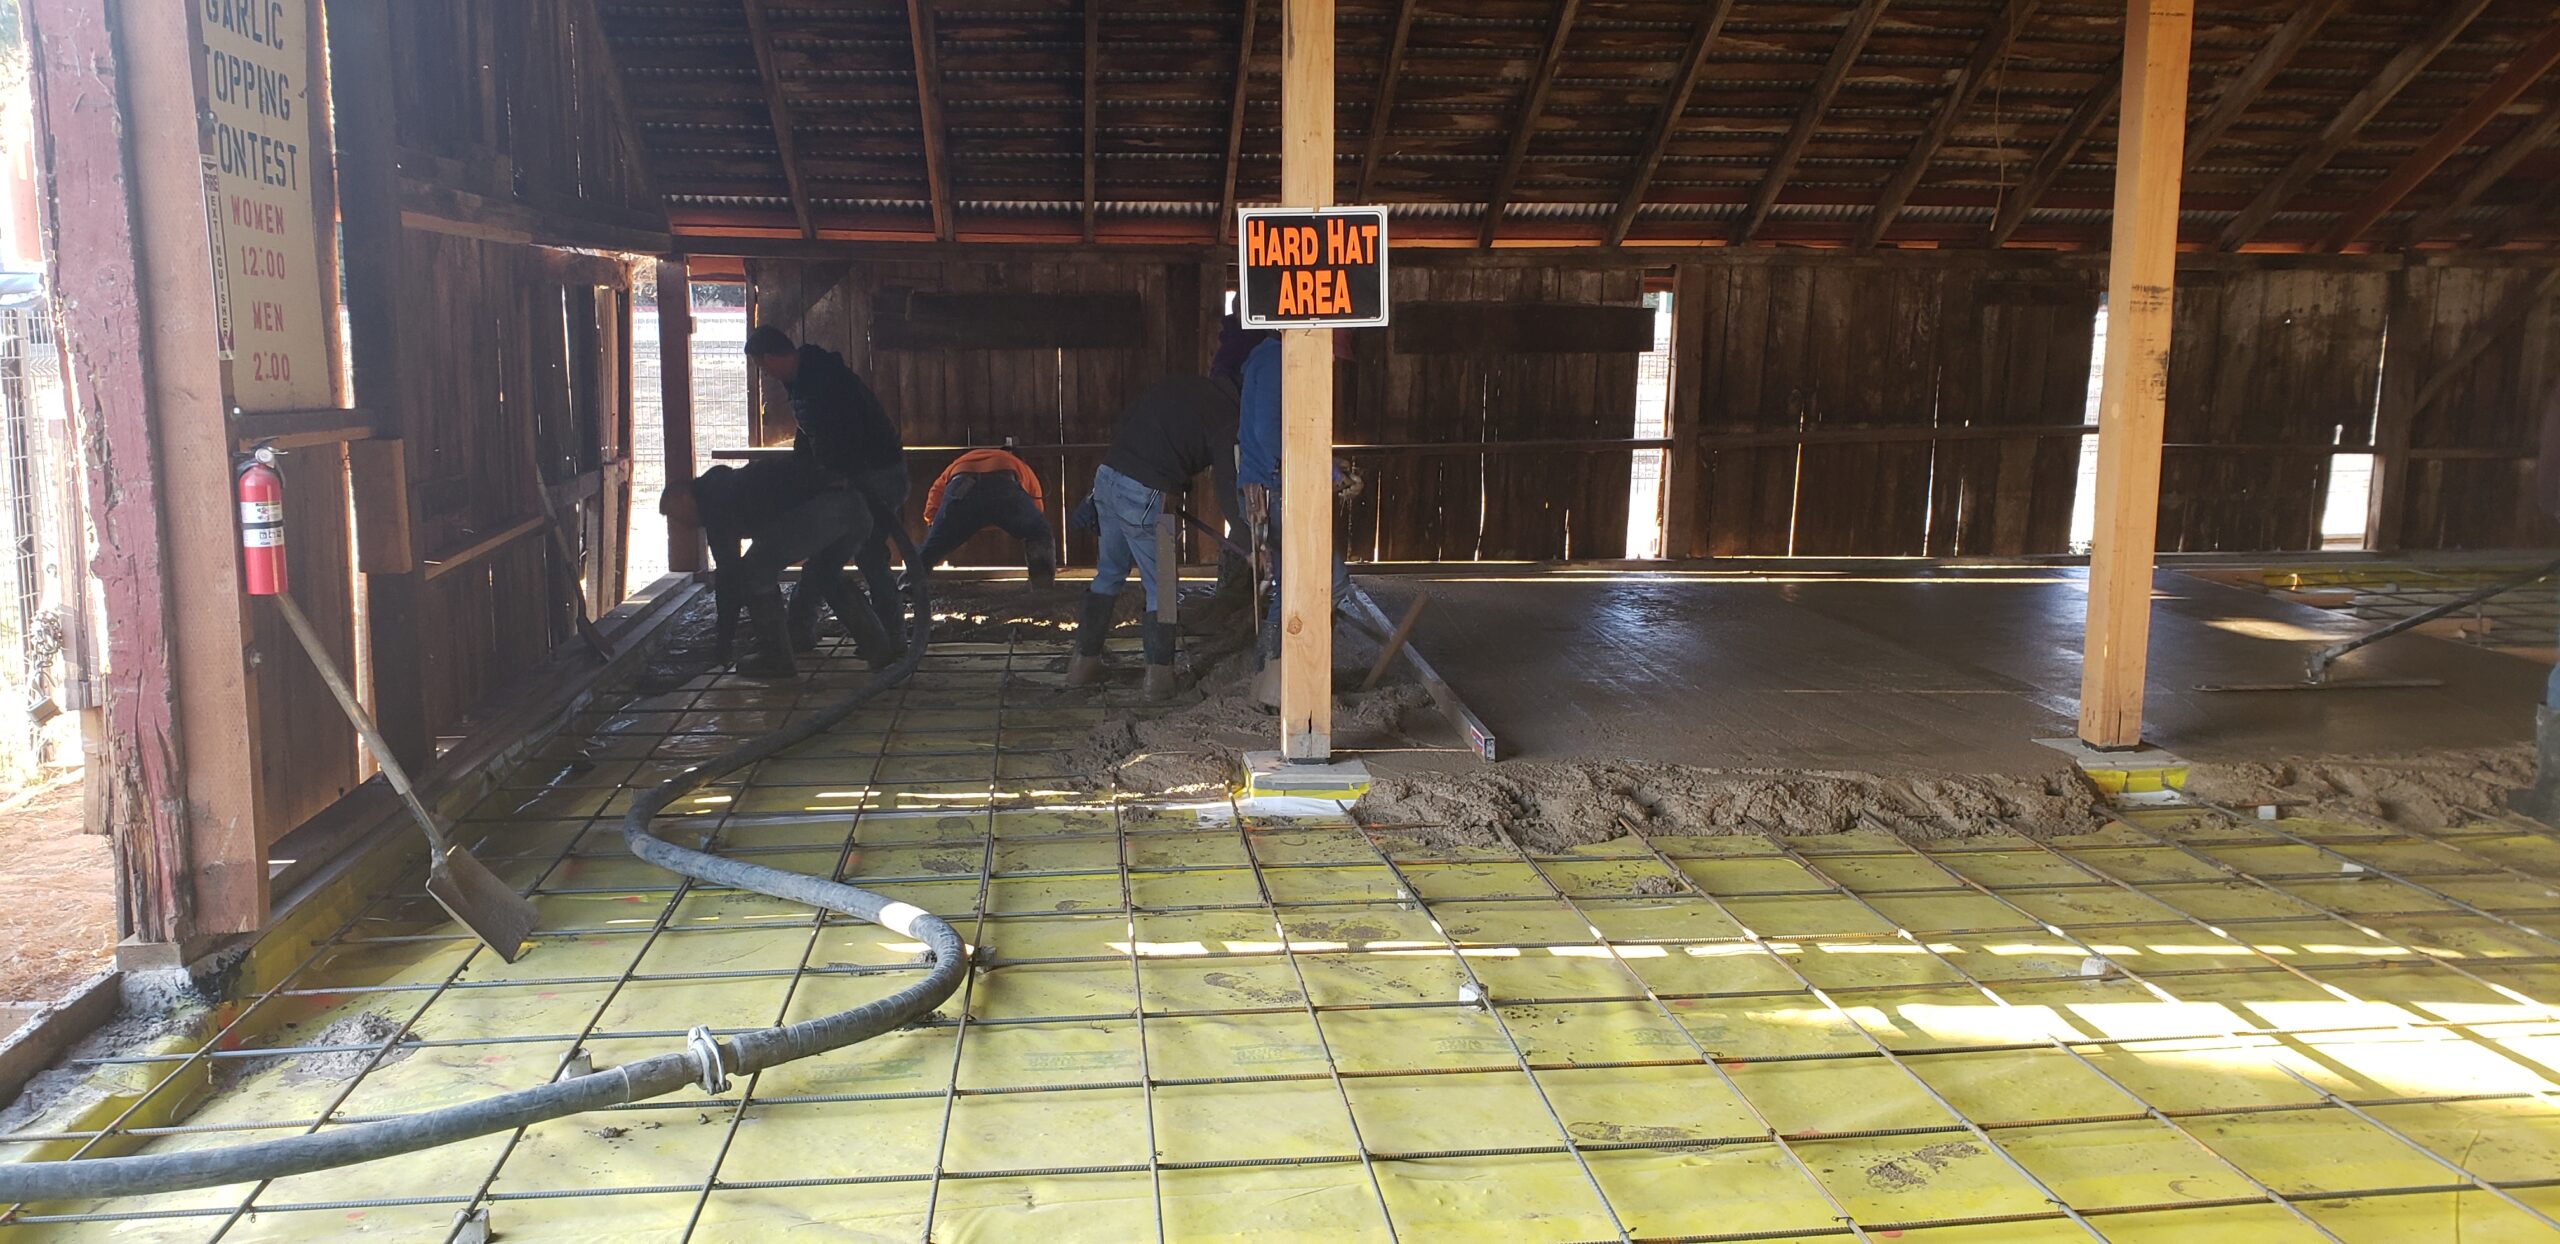 Barn, cement, hose, leveling, hard hat area,